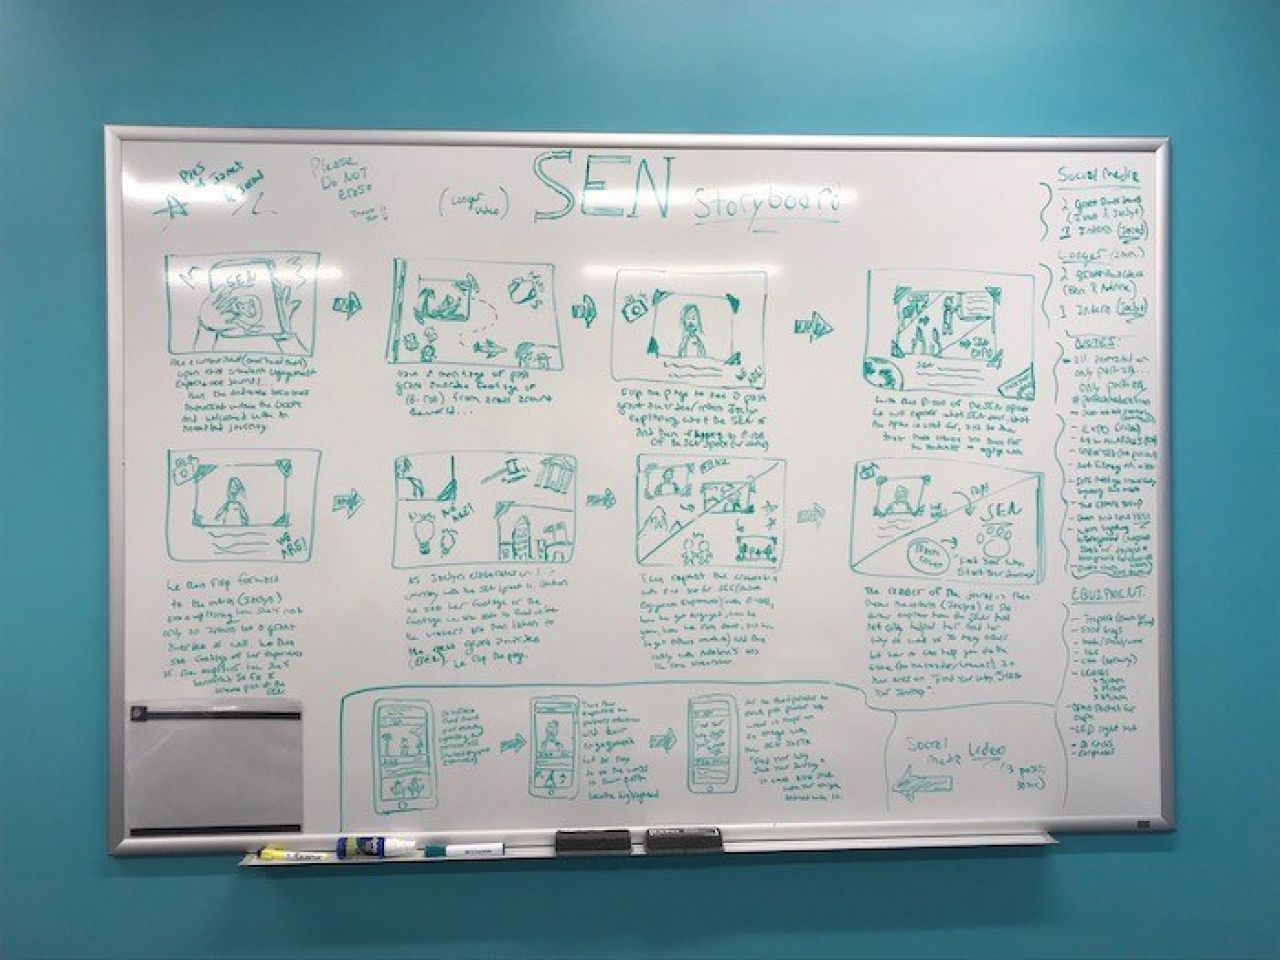 A whiteboard full of drawings and ideas for a video project.